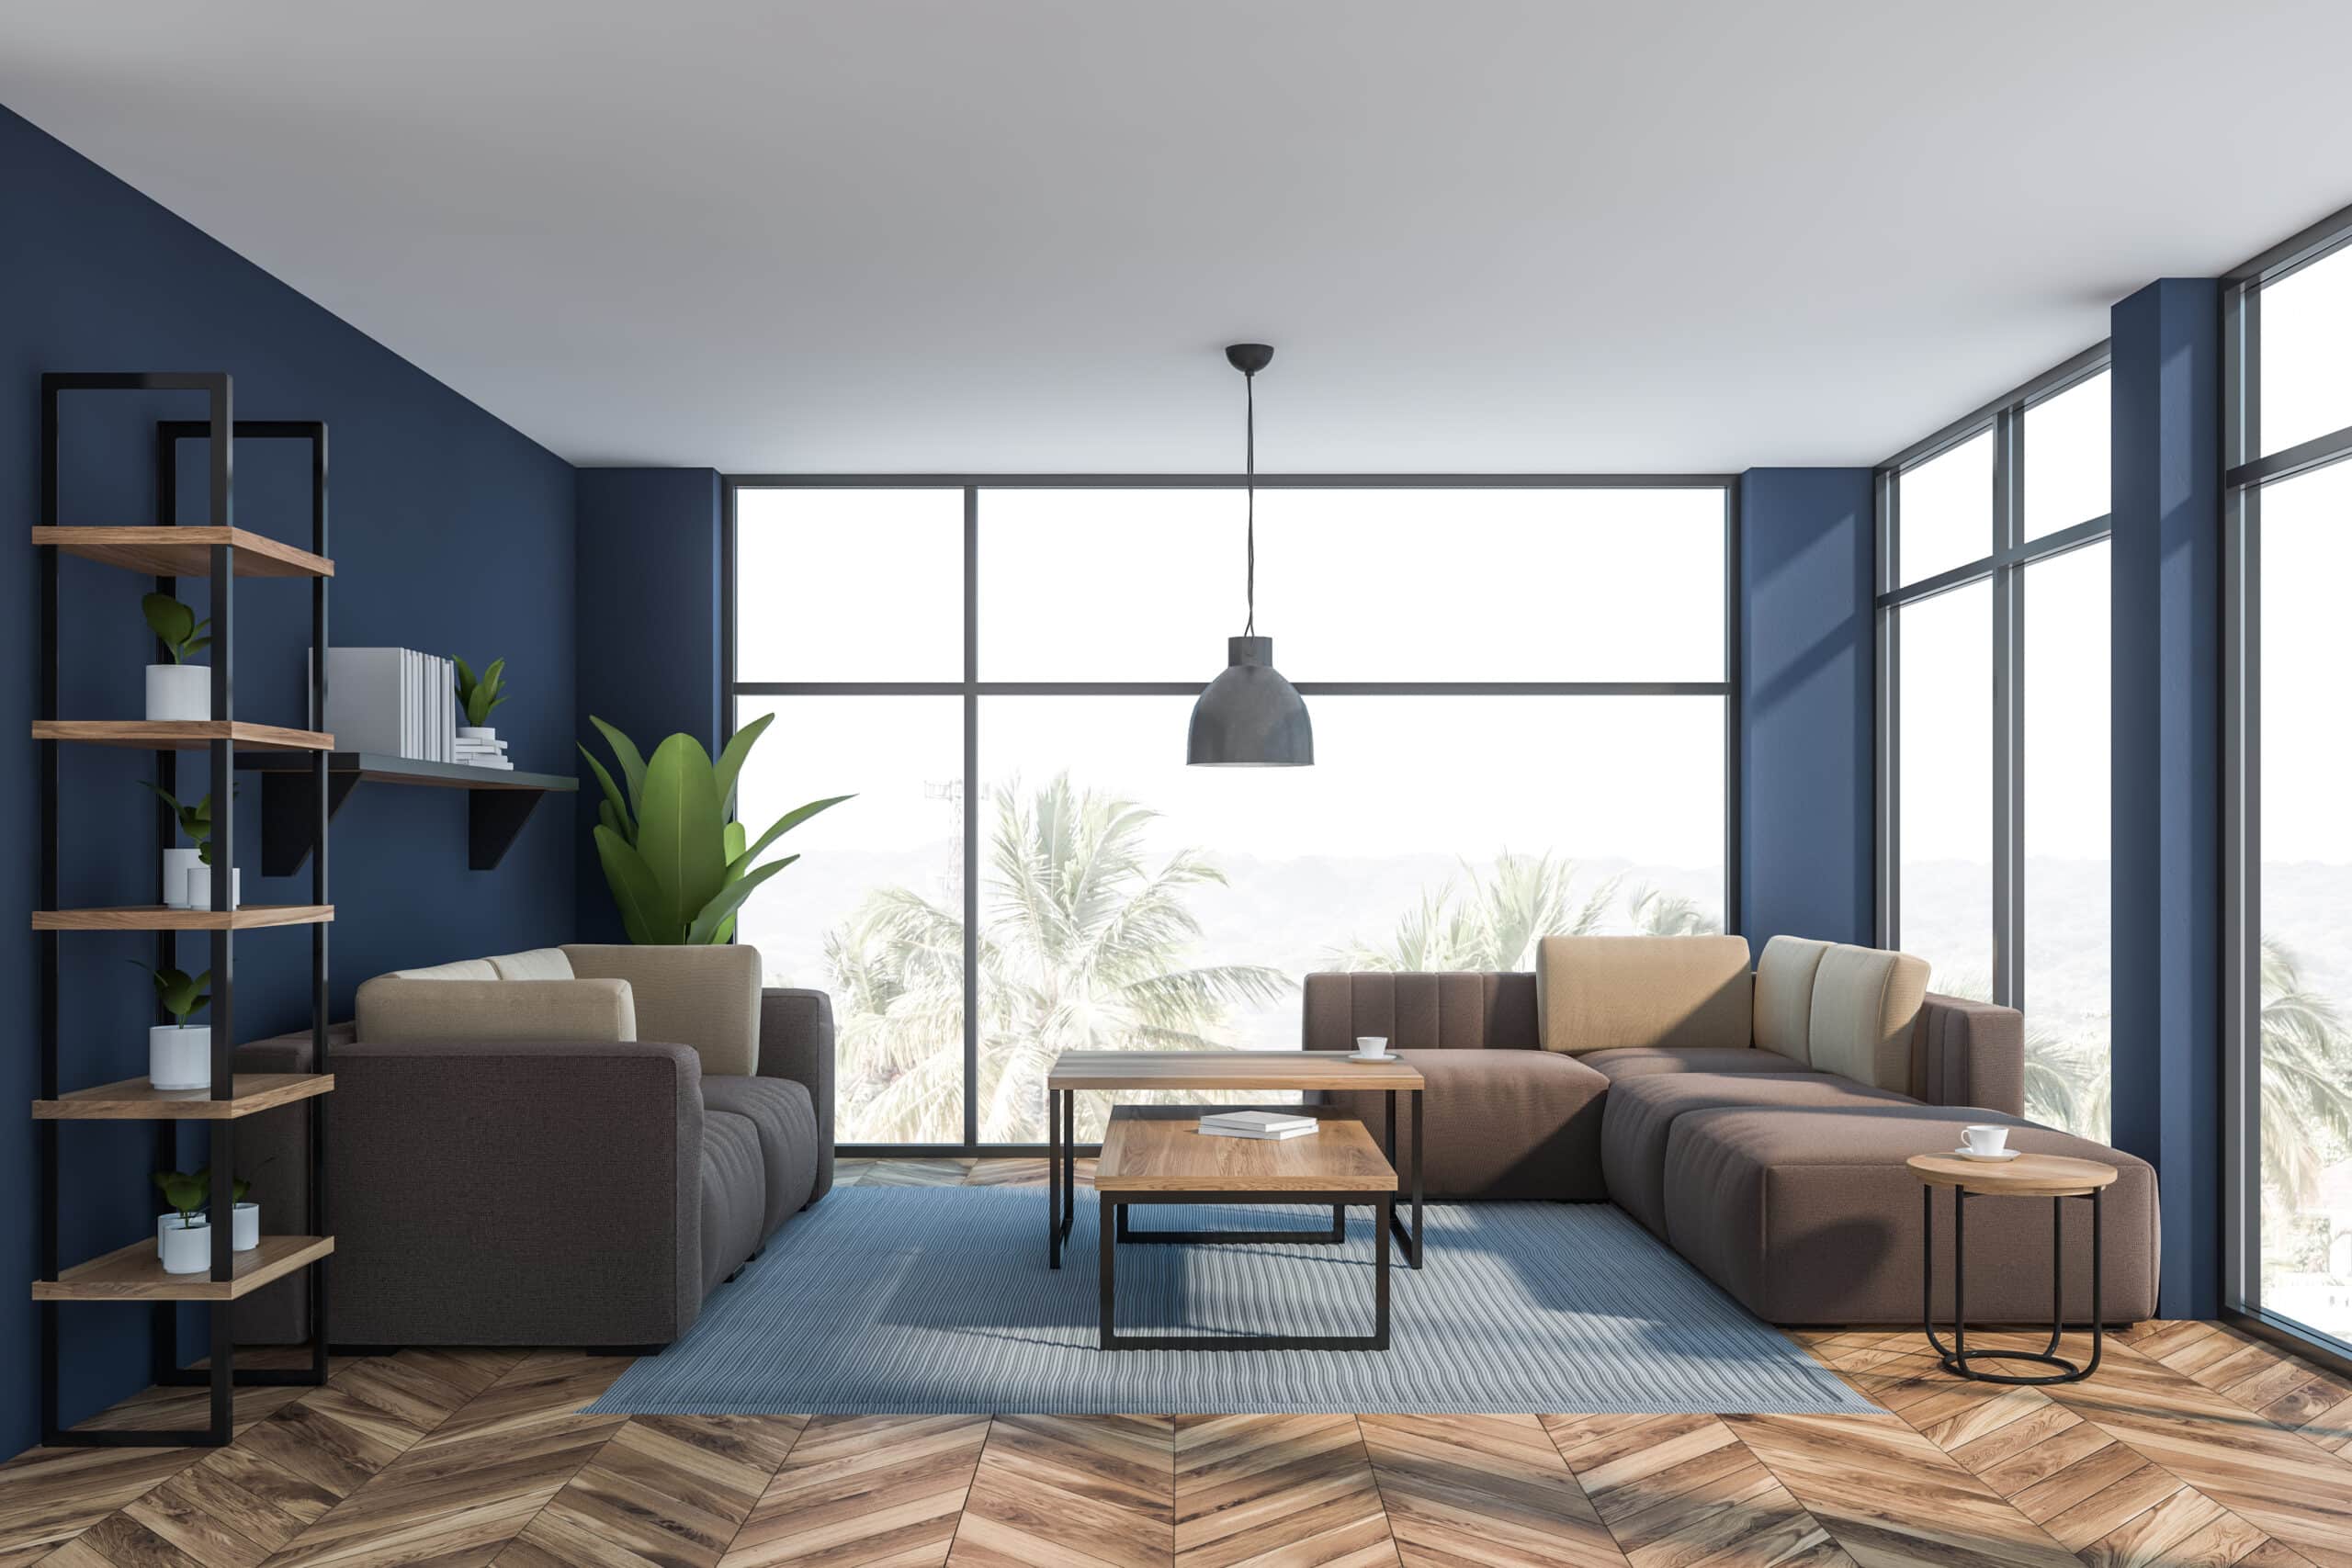 Home remodeling: Interior of a luxury living room or office lounge area with dark blue walls, wooden floors, beige sofas standing near wooden coffee tables, and shelves with plants and books, by Mana Home Services.